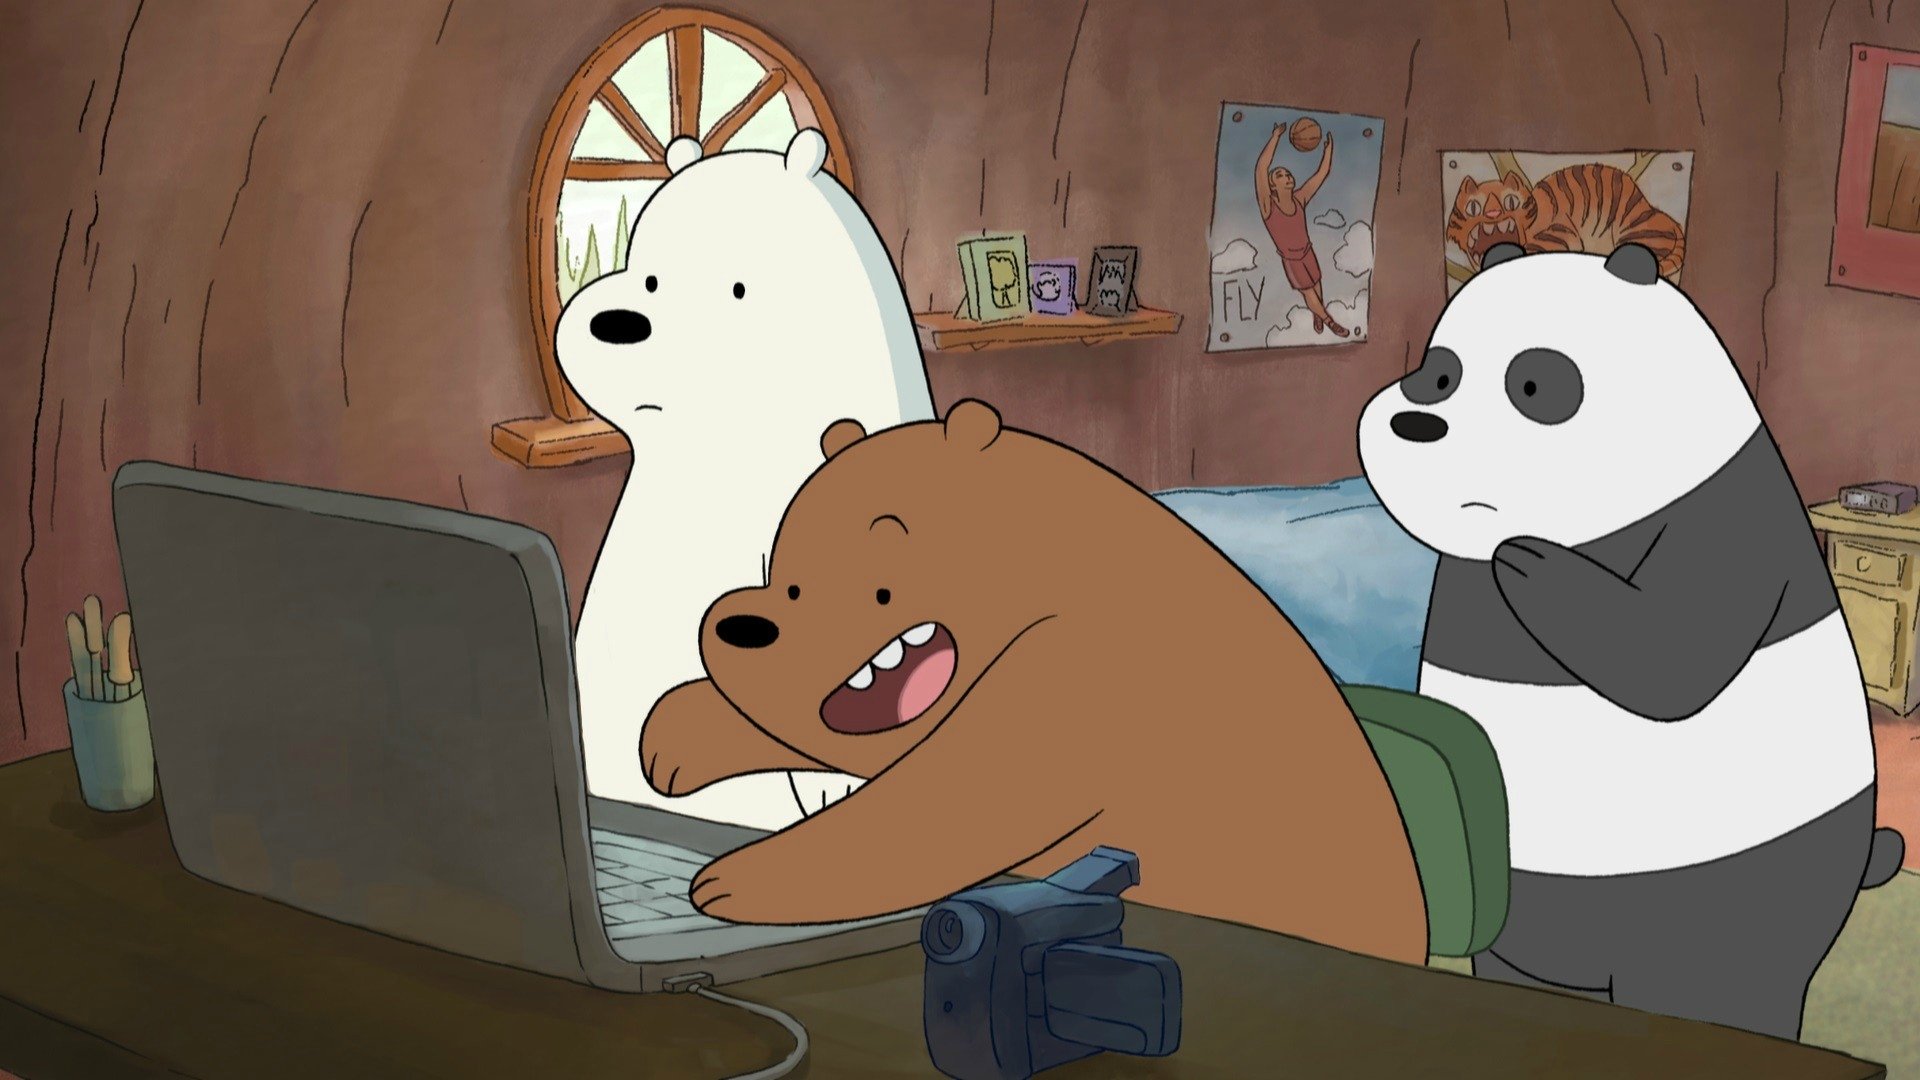 We Bare Bears is a show about three bears who live in a treehouse. - We Bare Bears